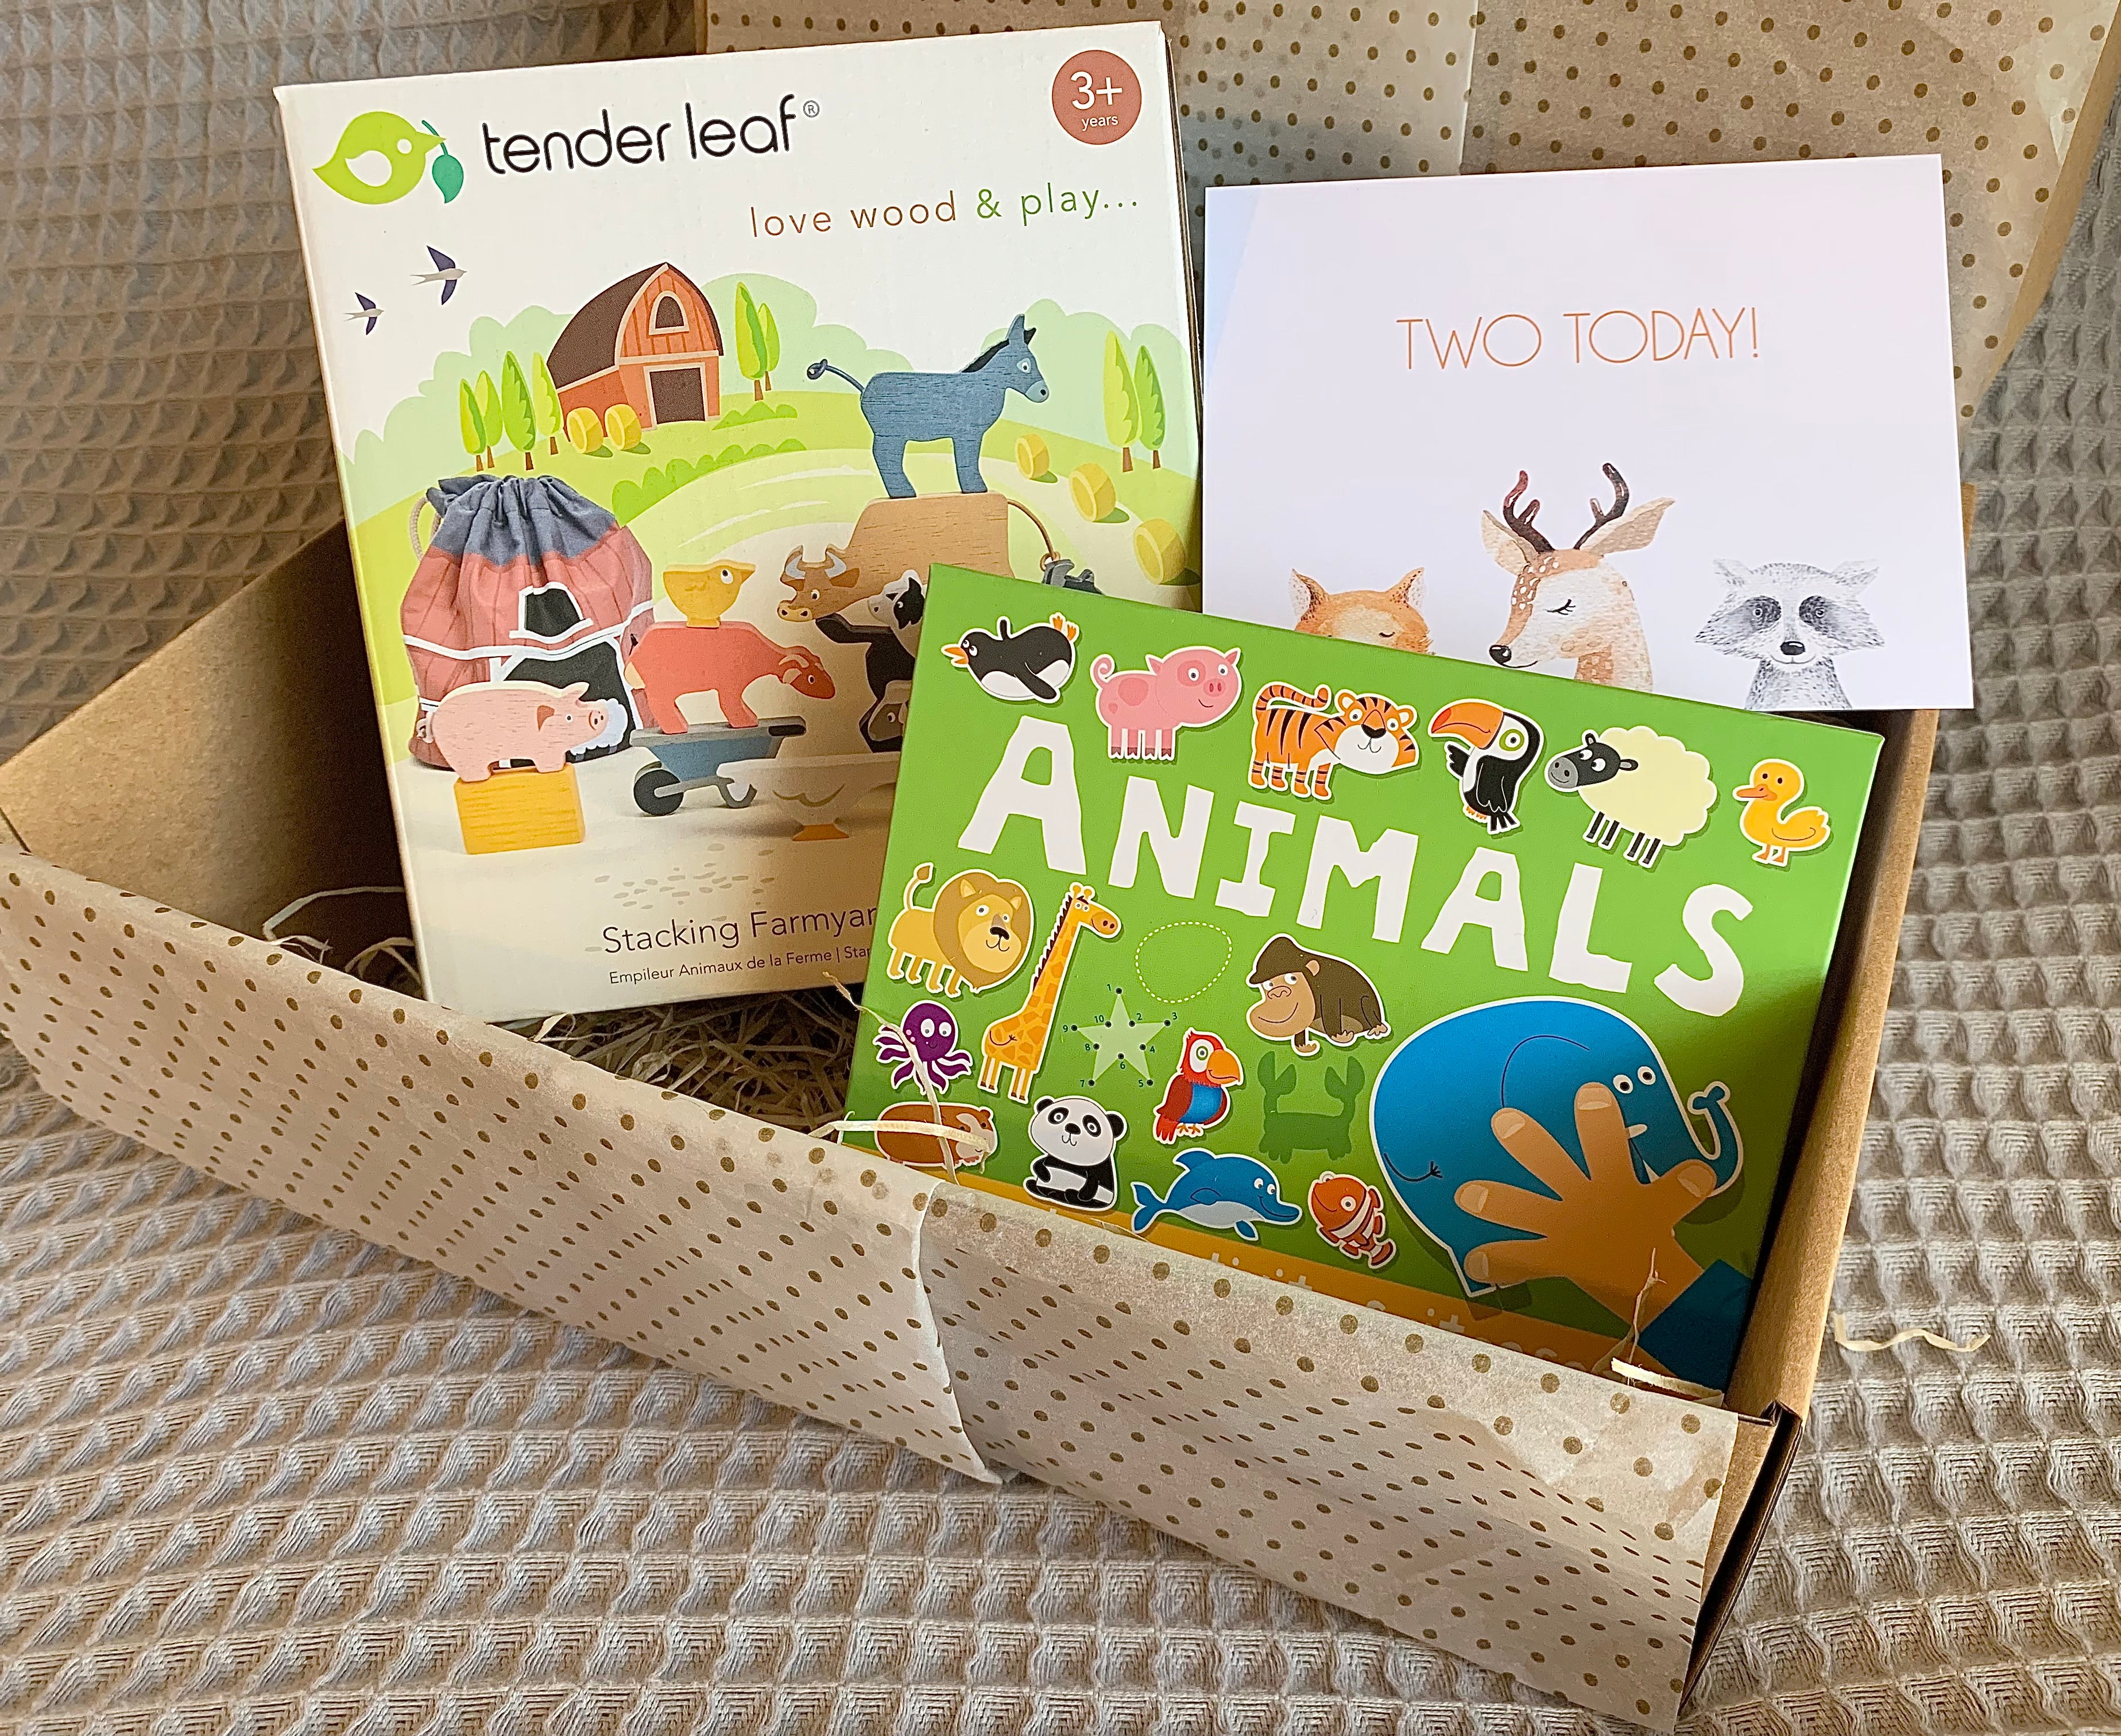 Second Birthday Gift Box with Wooden Toy Farm Animals and Animals Activity Books